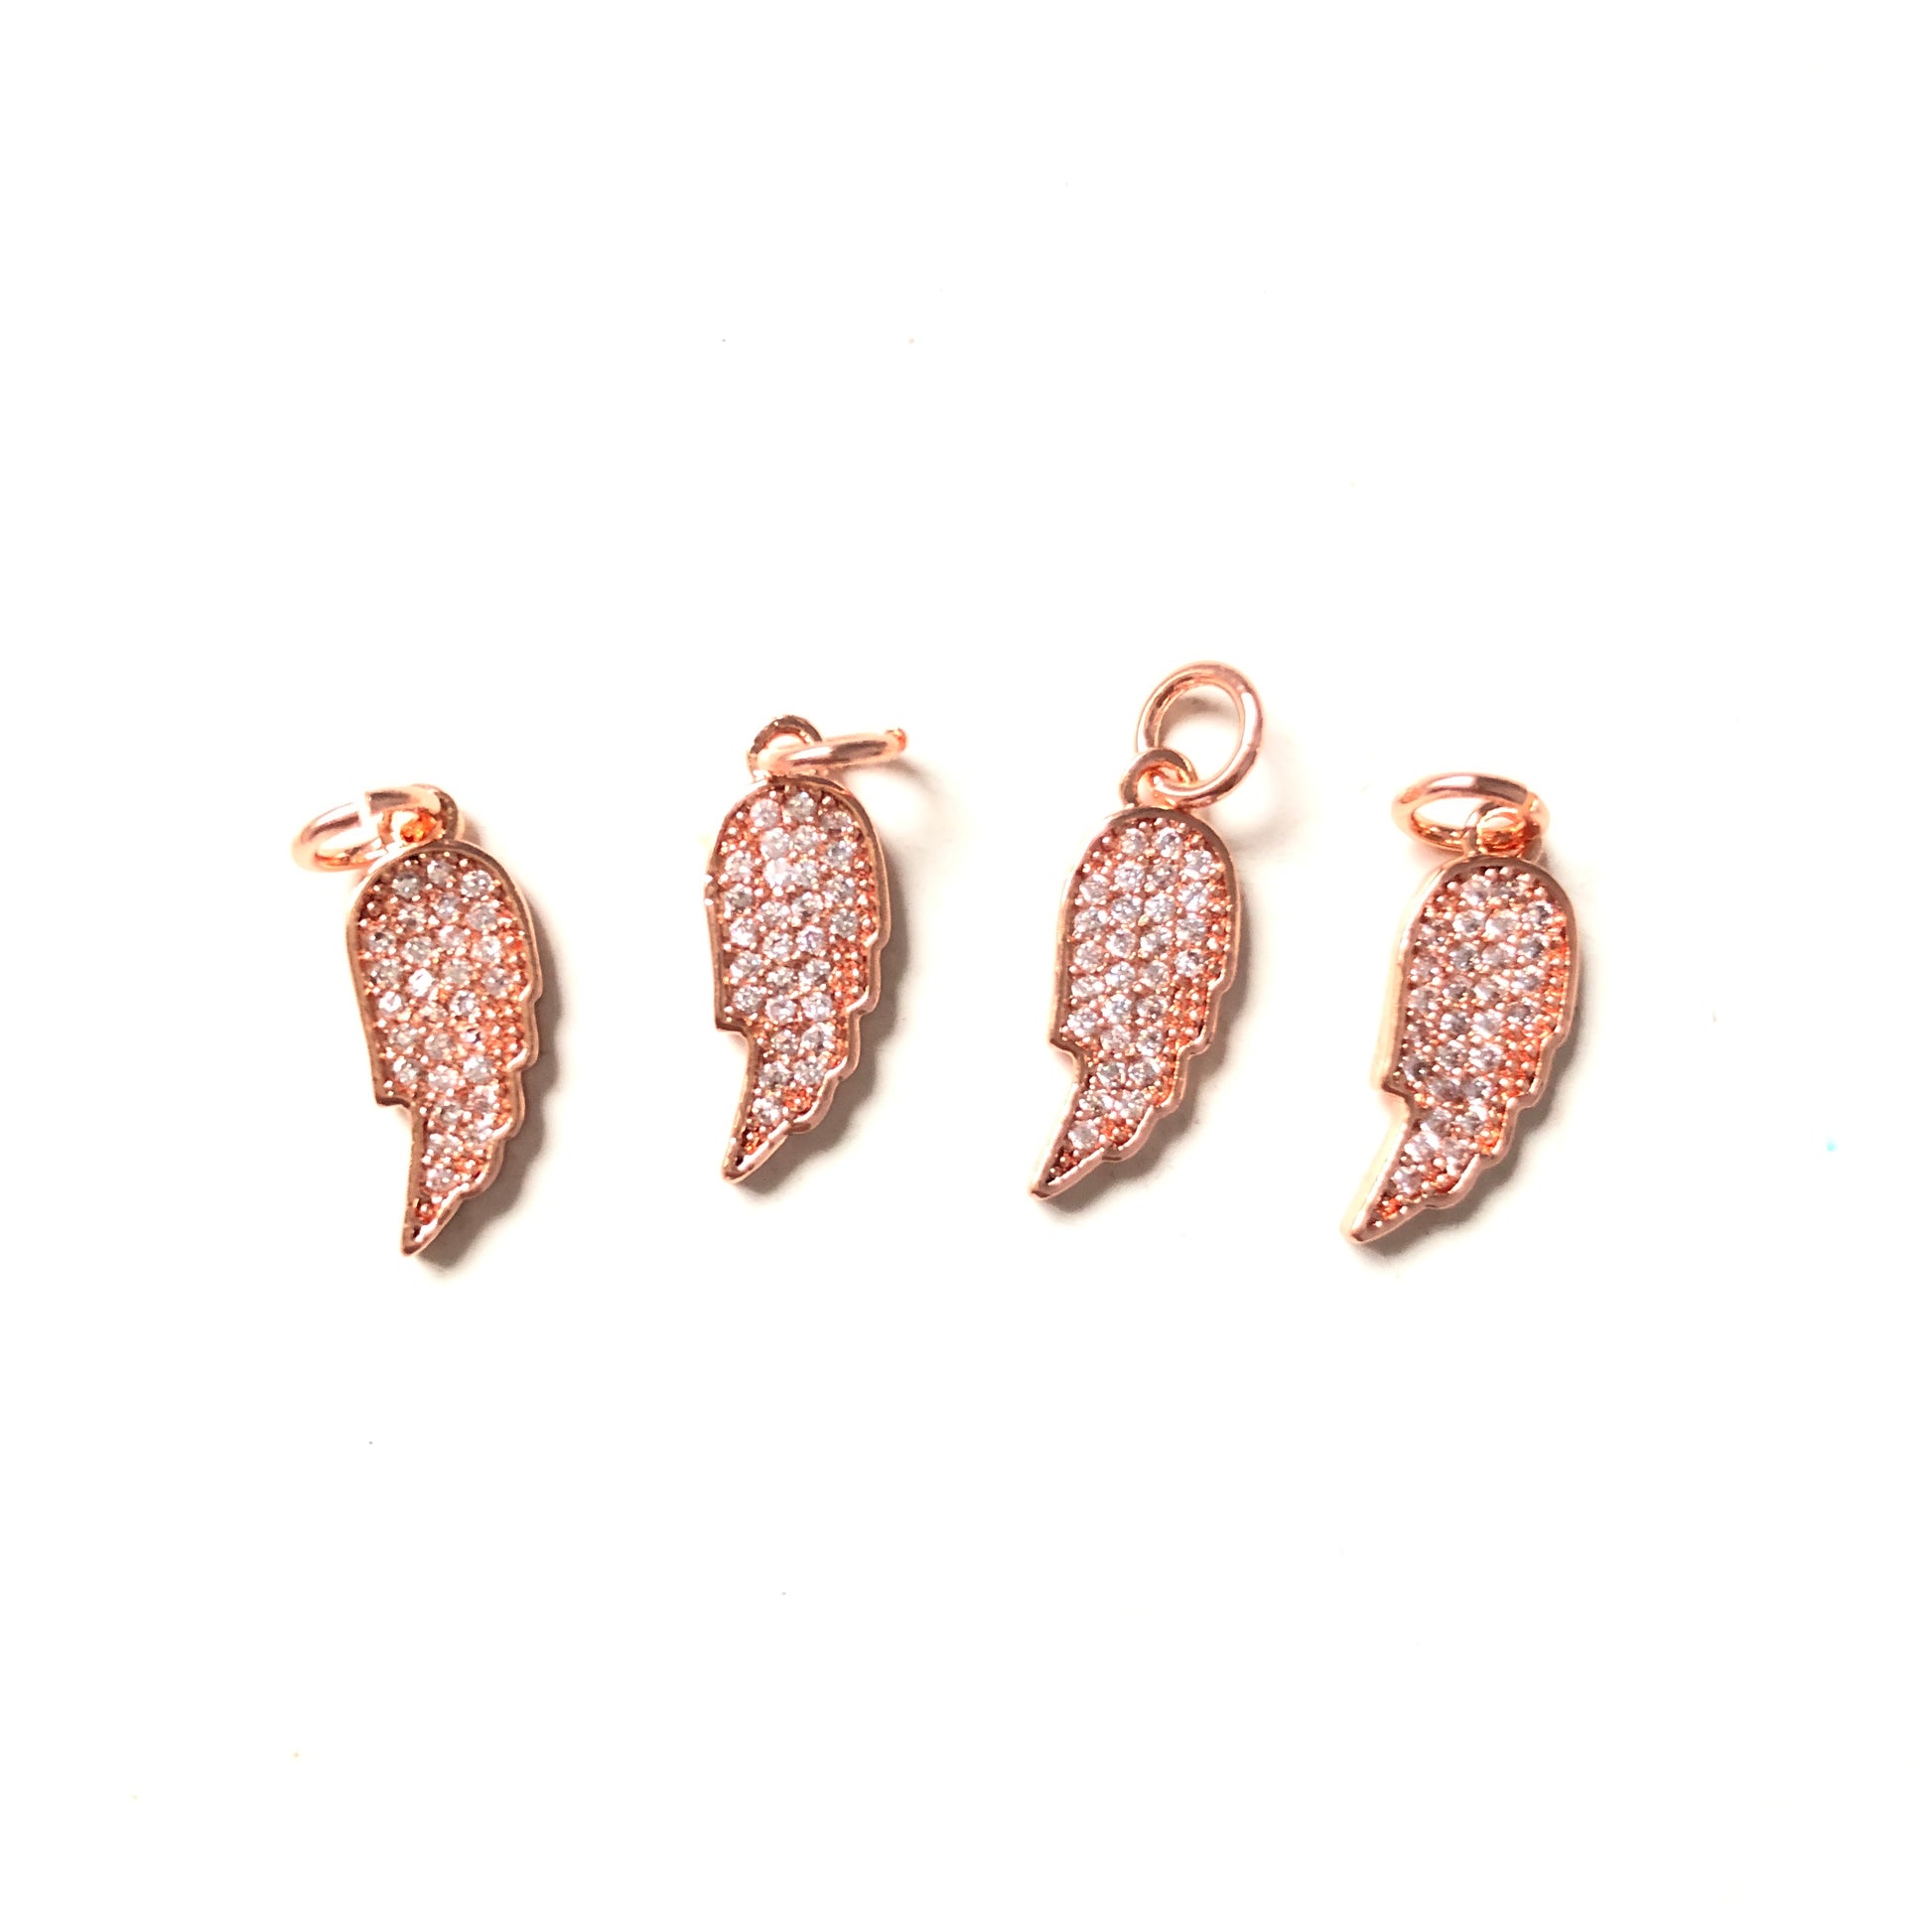 10pcs/lot 15*6mm CZ Paved Wing Charms Rose Gold CZ Paved Charms Small Sizes Wings Charms Beads Beyond